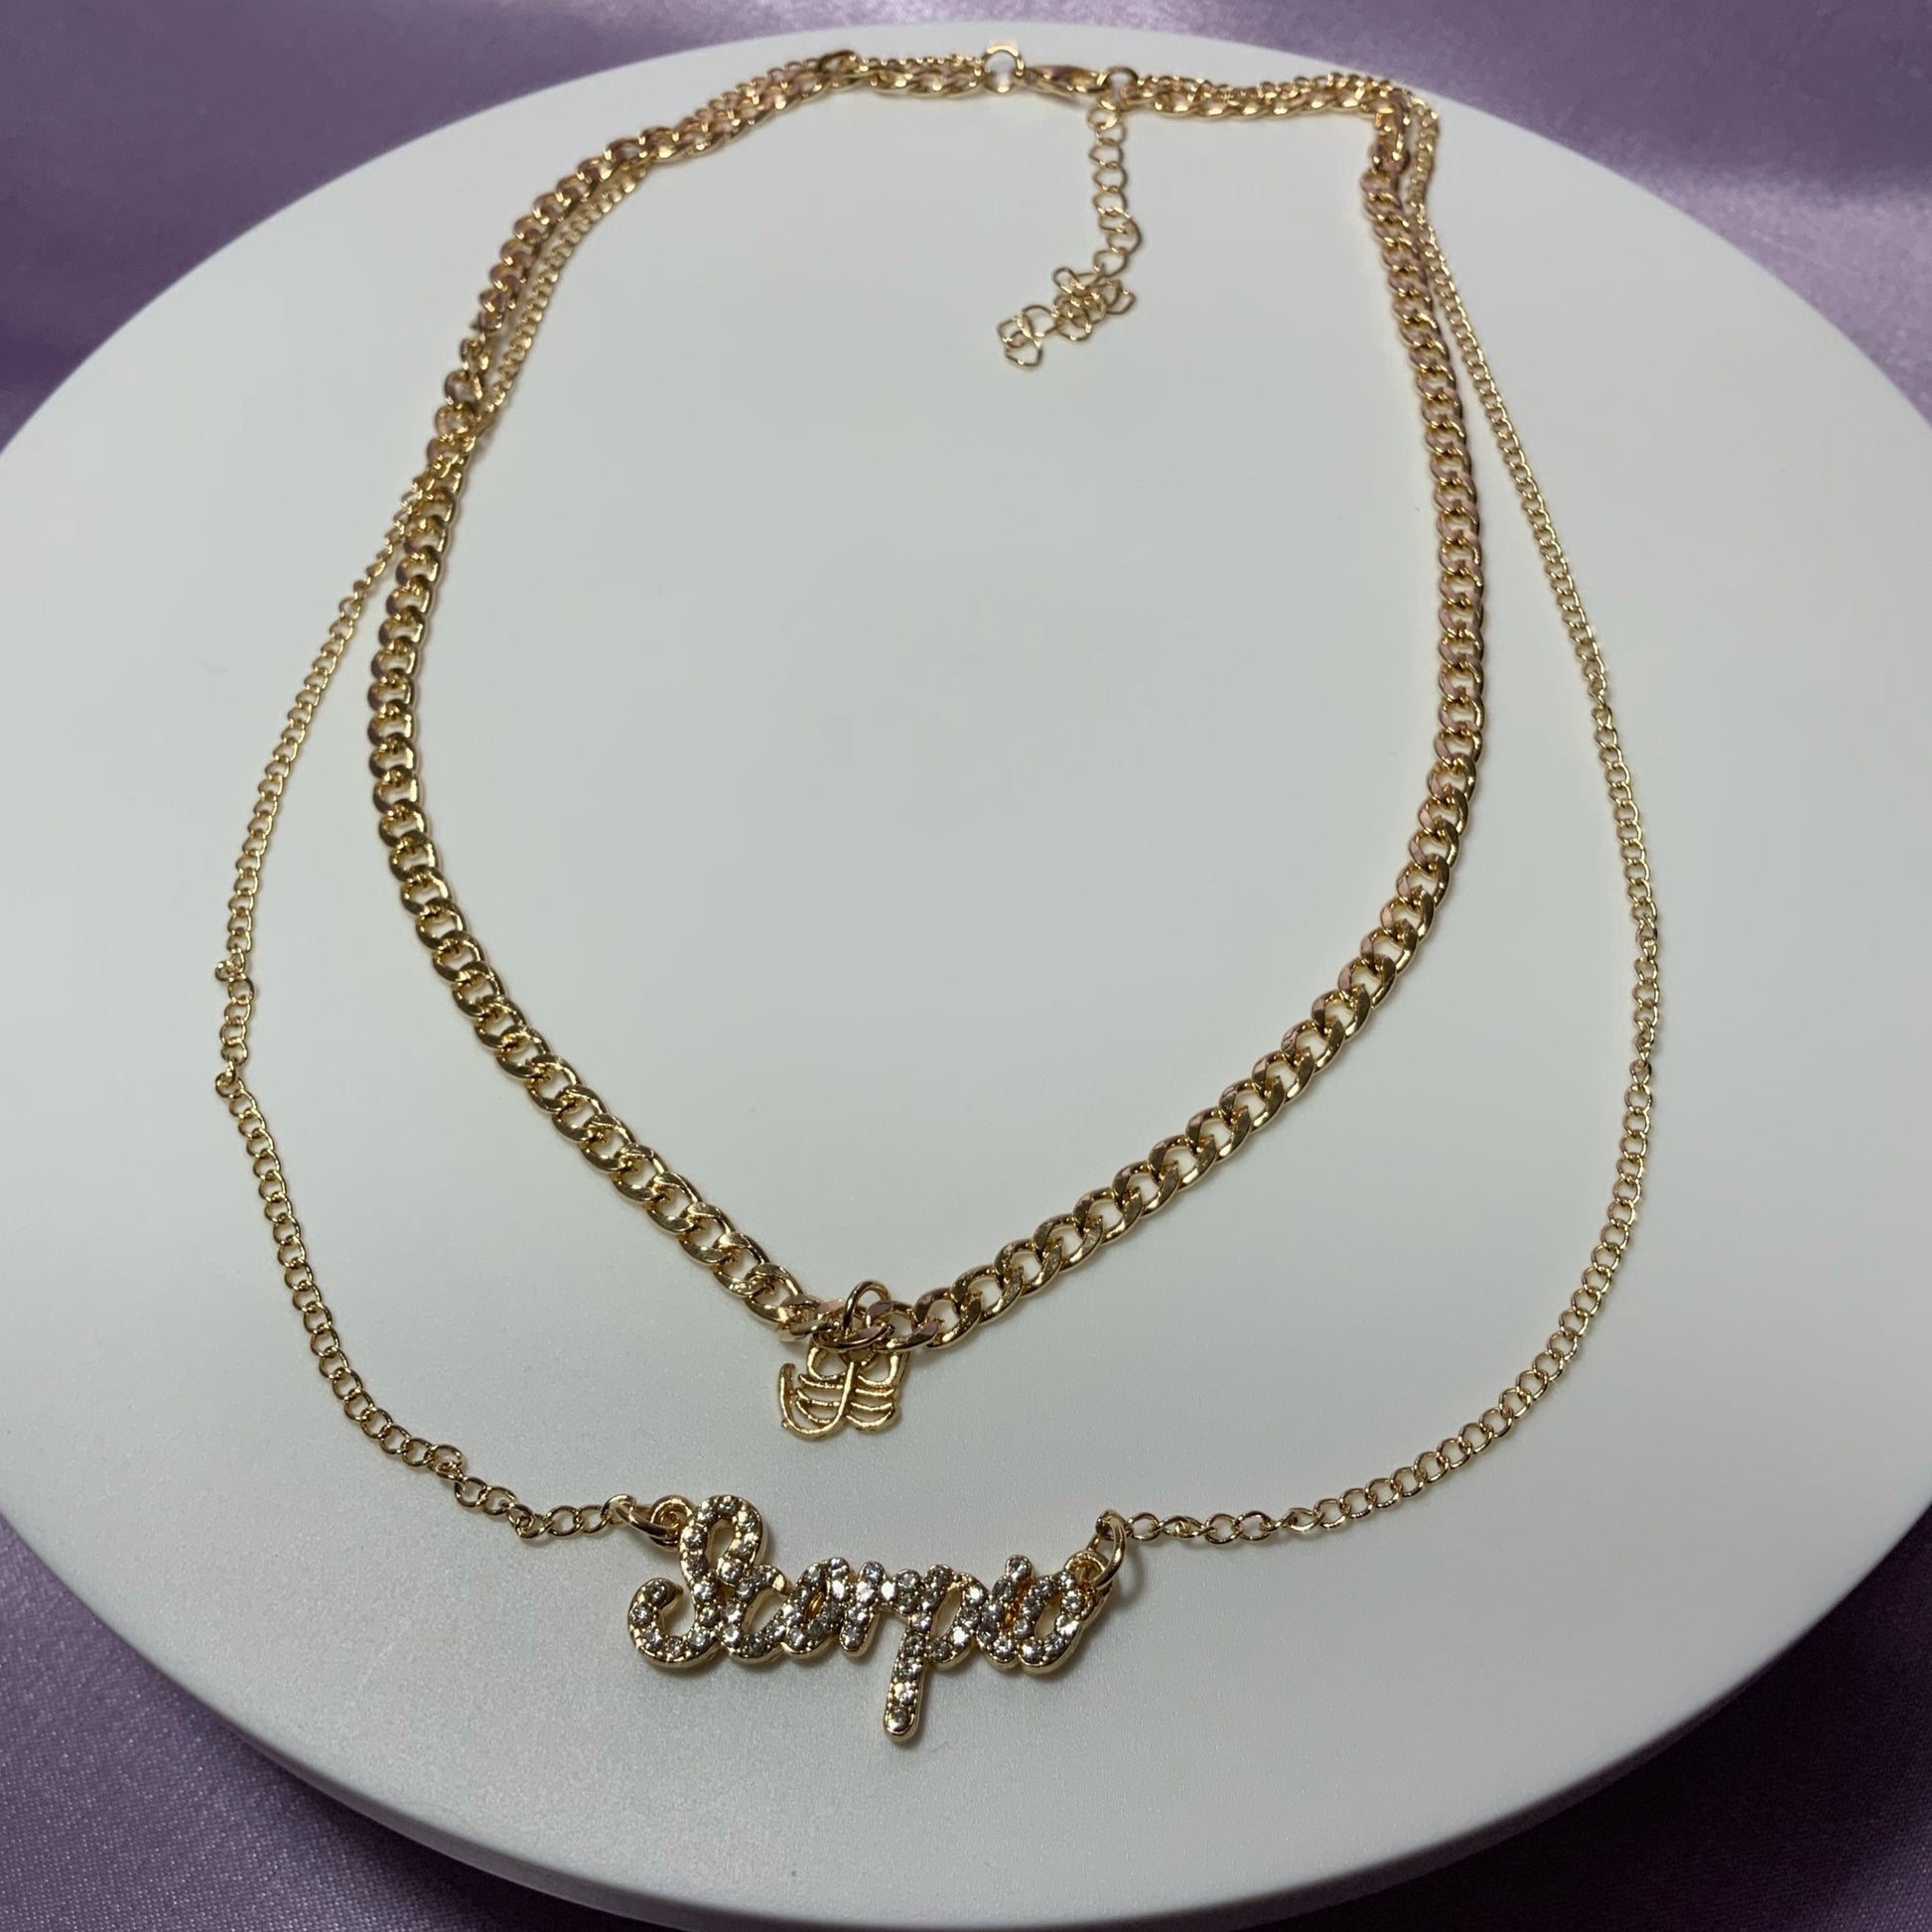 Scorpio necklace. Gold plated zodiac necklaces. Zodiac name necklaces. Zodiac sign necklaces with zodiac sign pendants. Zodiac name necklaces. 